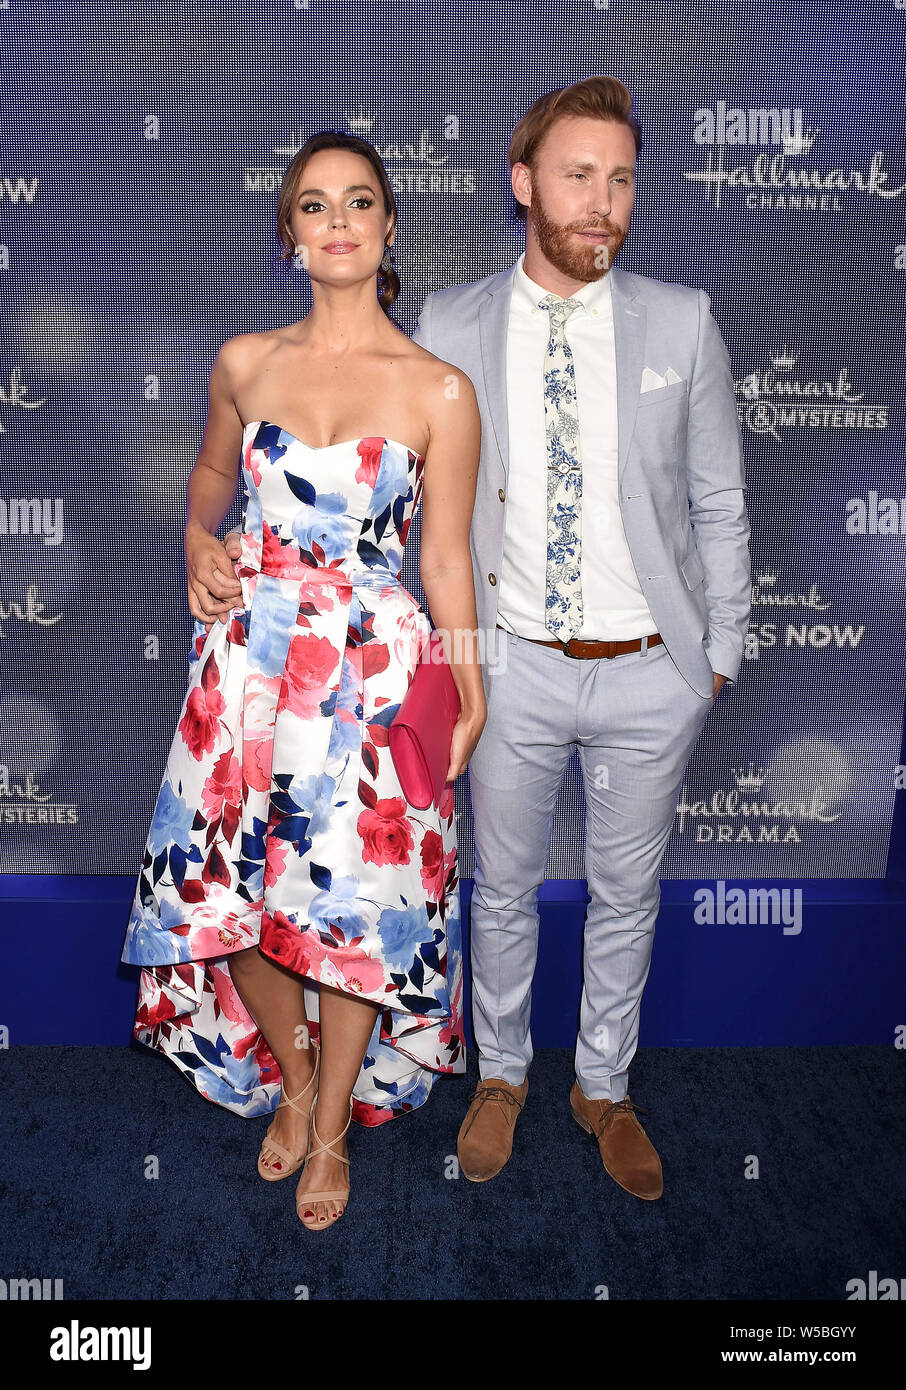 BEVERLY HILLS, CA - JULY 26: Erin Cahill (L) and Paul Freeman attend the Hallmark Channel and Hallmark Movies & Mysteries Summer 2019 TCA Press Tour Event held at a private residence on July 26, 2019 in Beverly Hills, California. Stock Photo